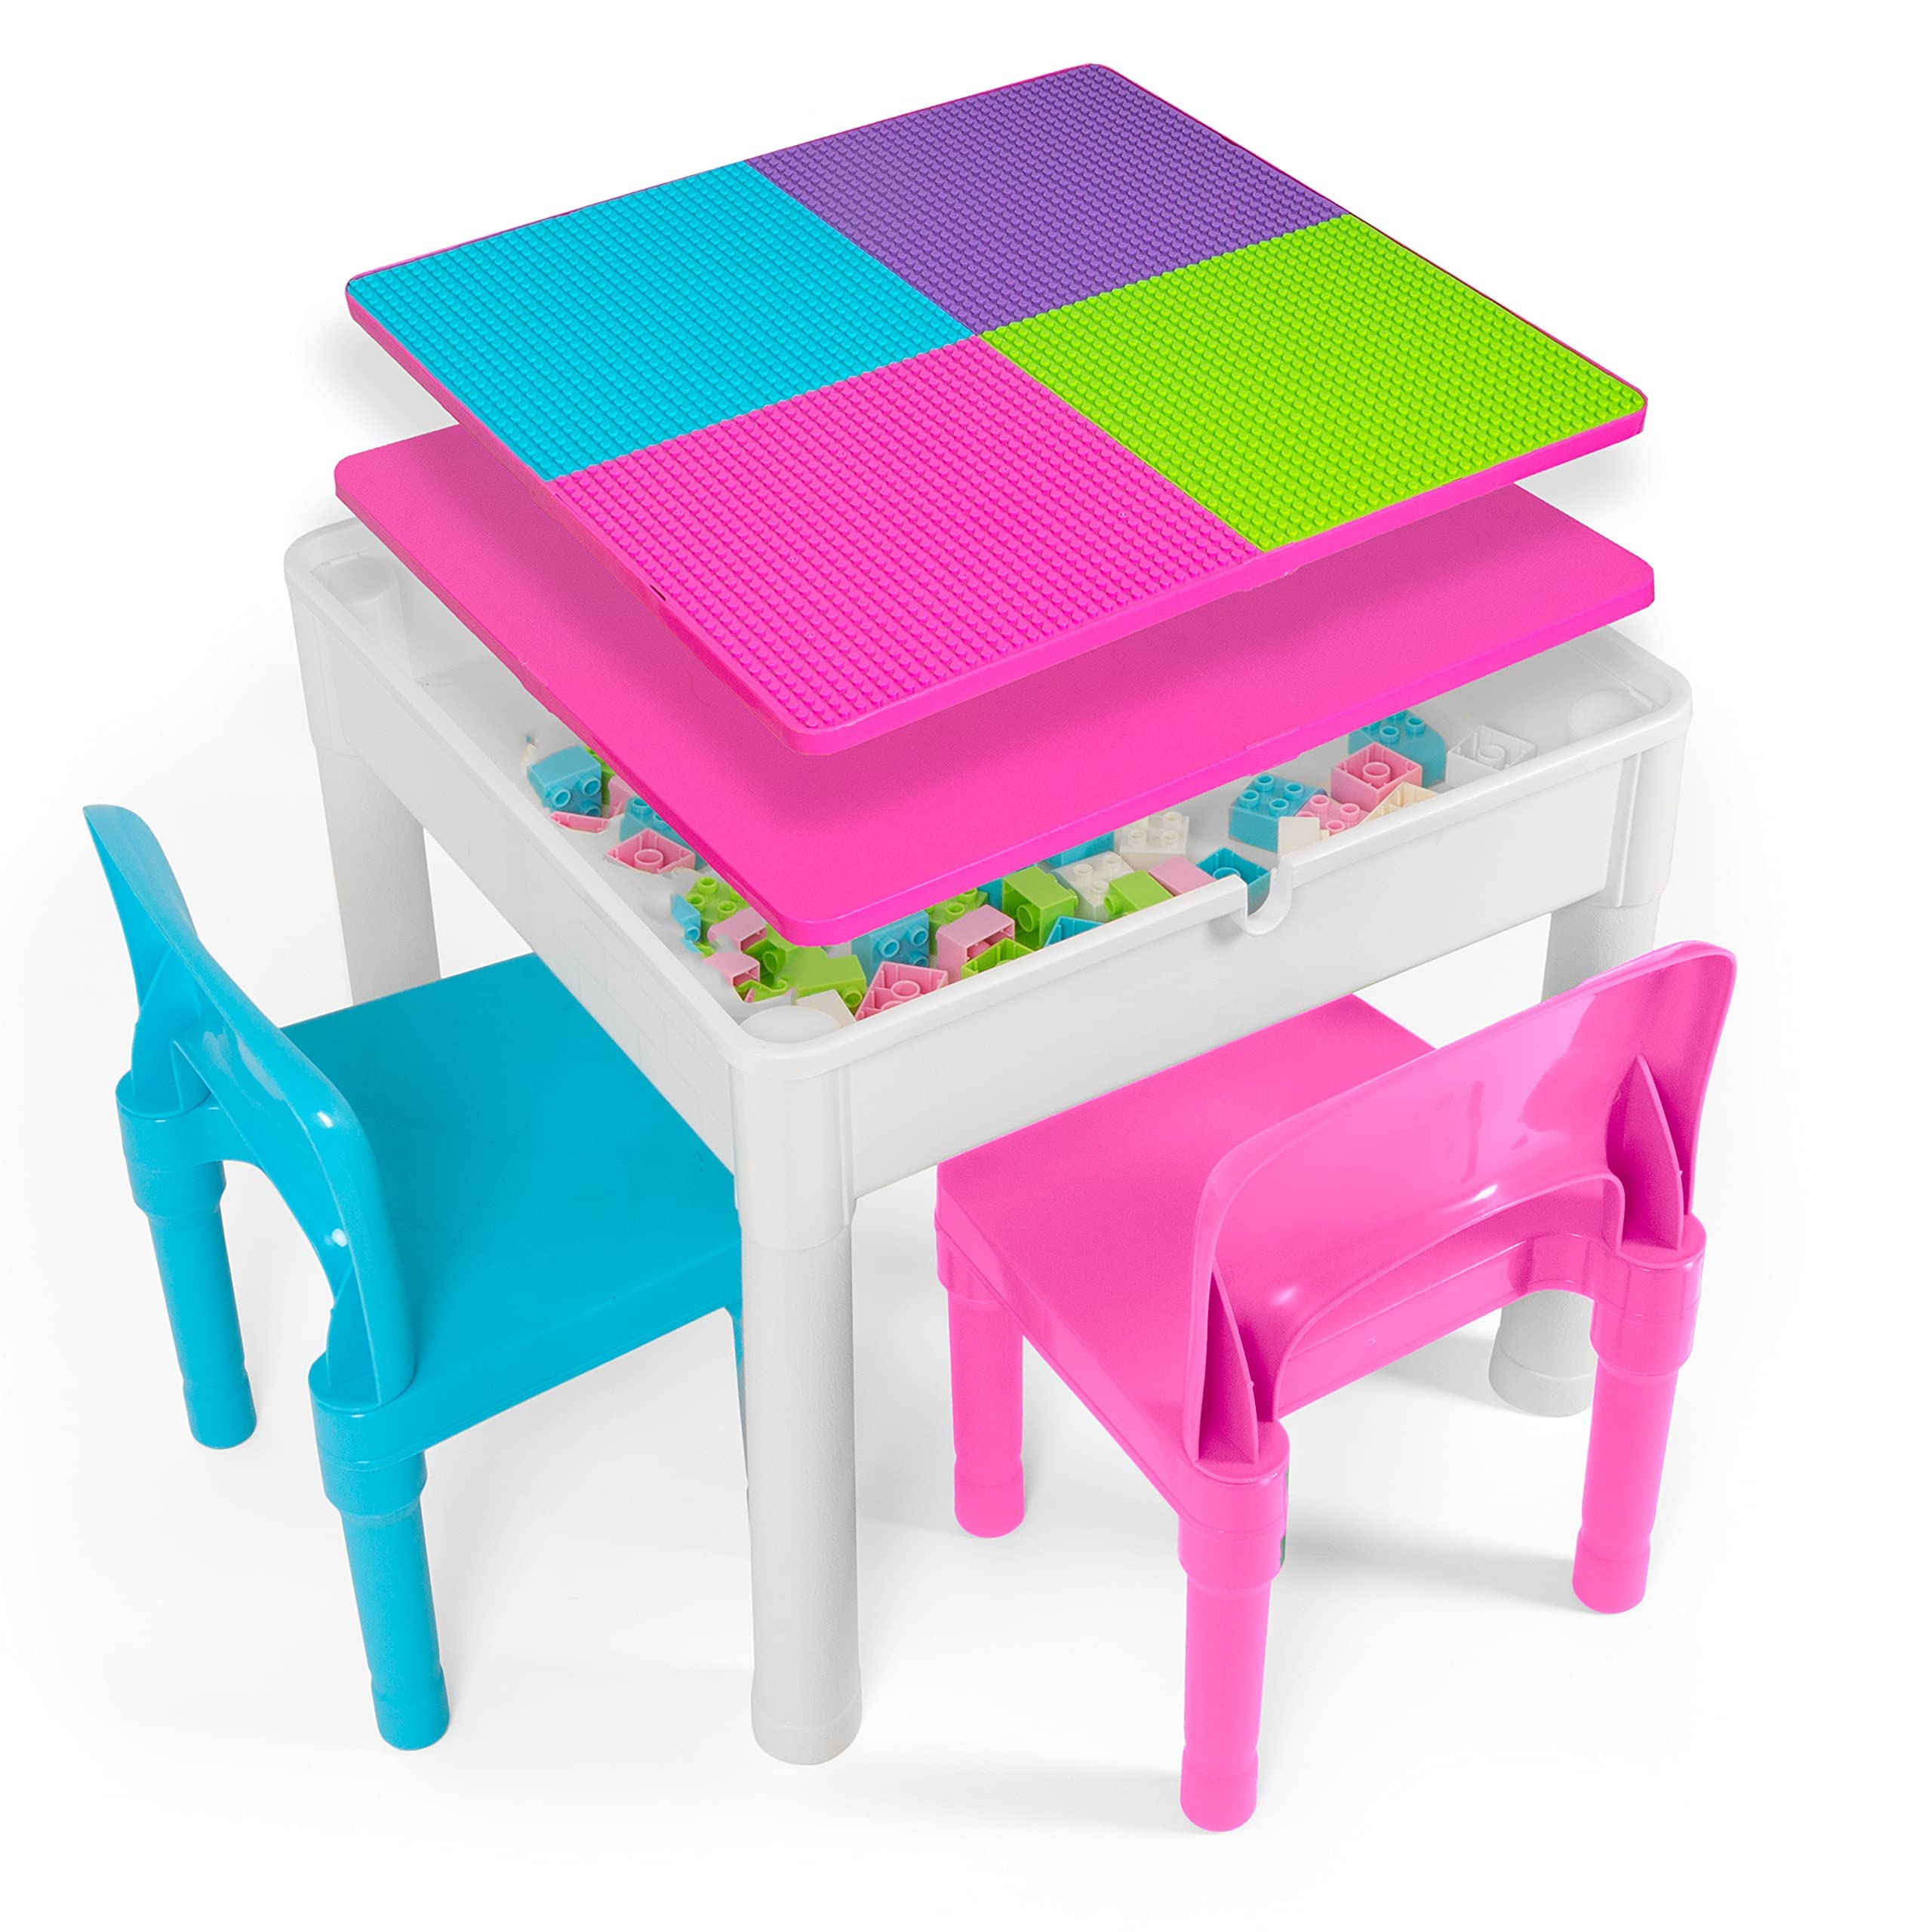 Play Platoon Kids Activity Table and Chair Set, Activity Table for Toddlers, 5-in-1 Sensory Table, Kids Art Table, Water Table, 